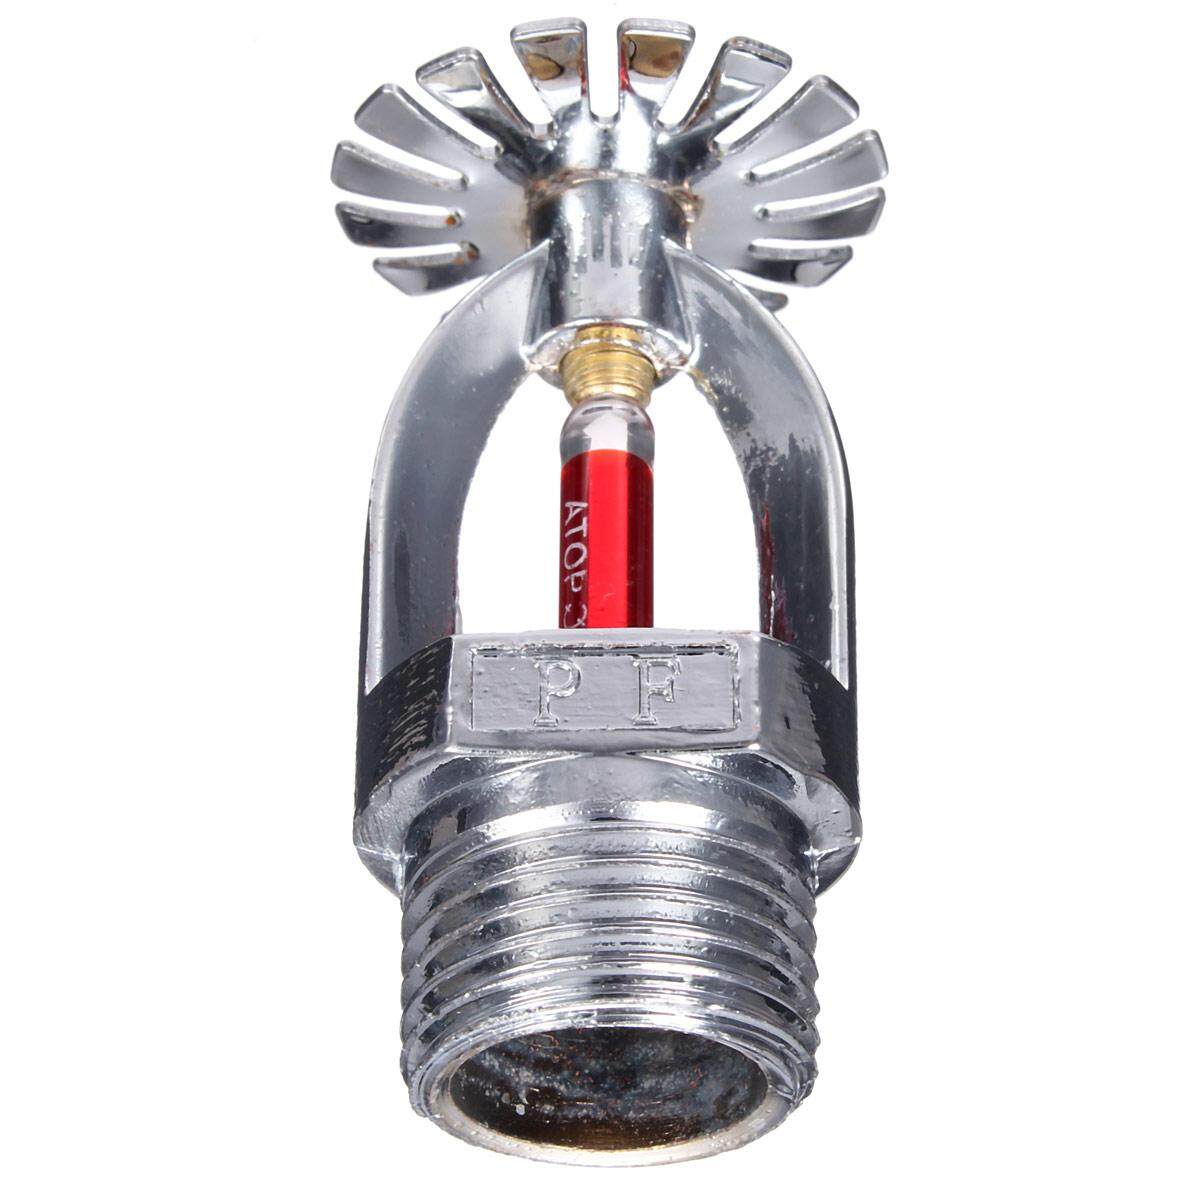 ZSTX-15 68℃ Pendent Fire Extinguishing Systems Protection Fire Sprinkler,Hea FO